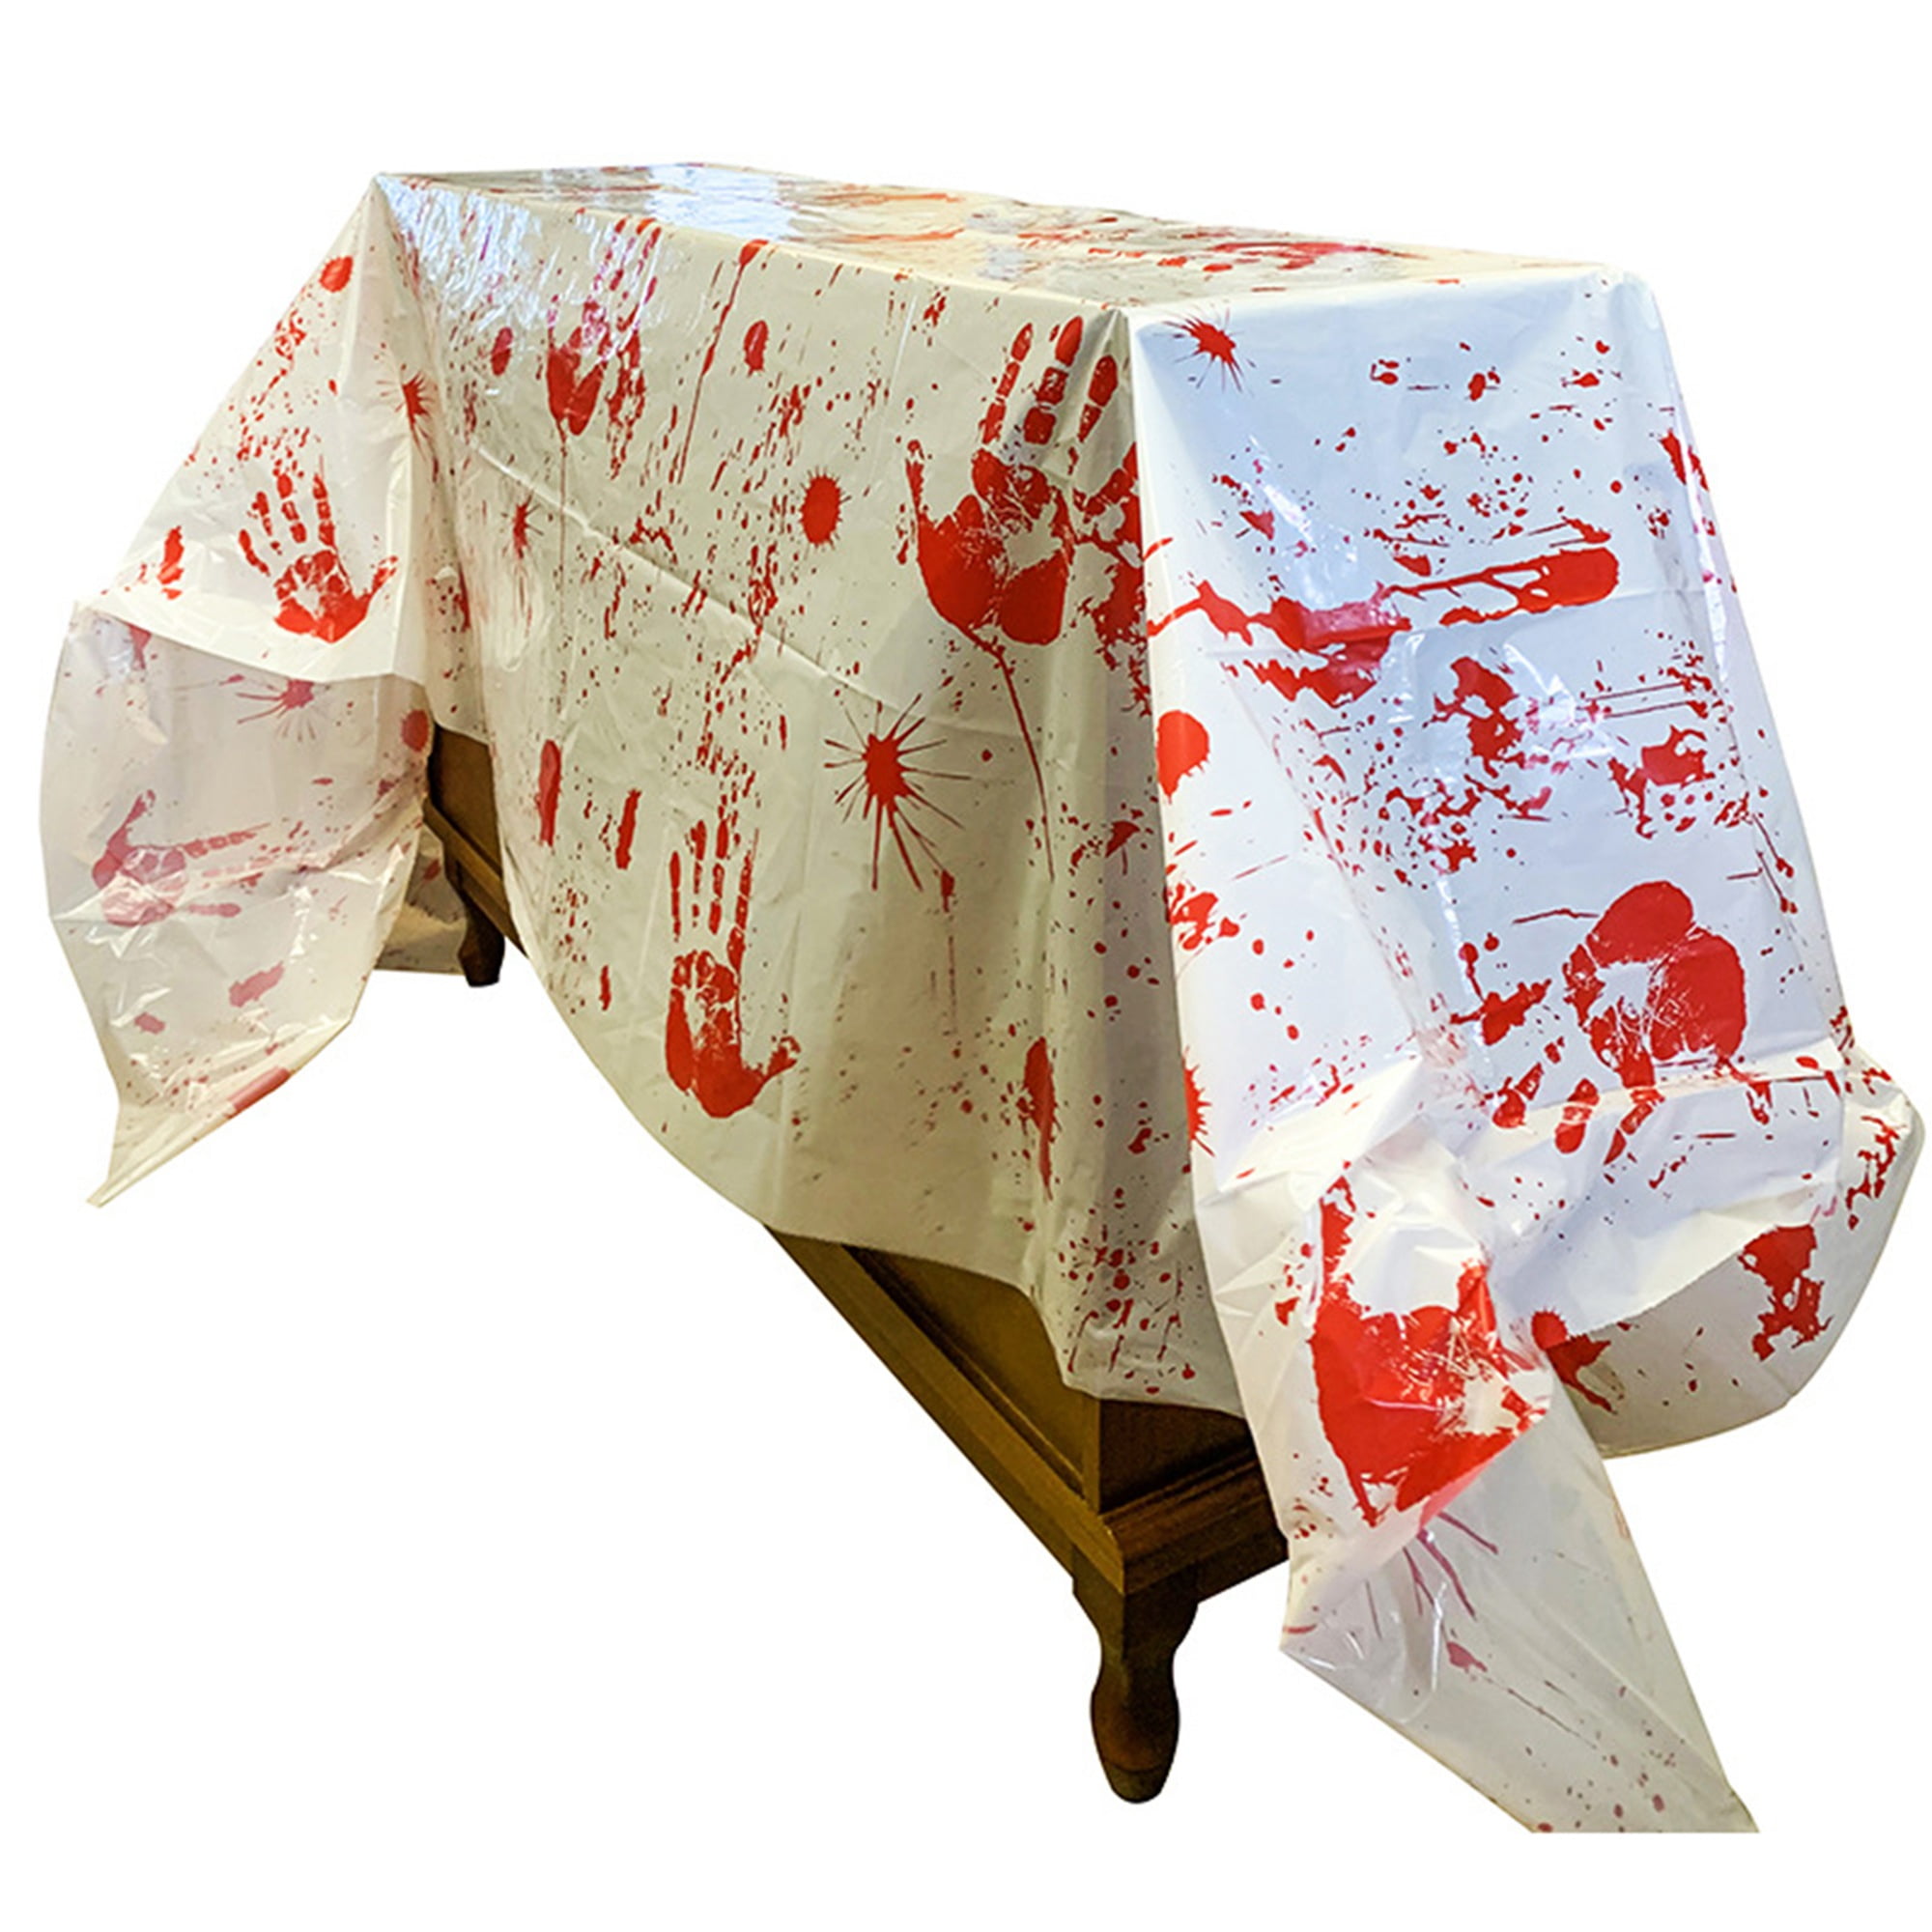 Bloody Hand Print Table Cover